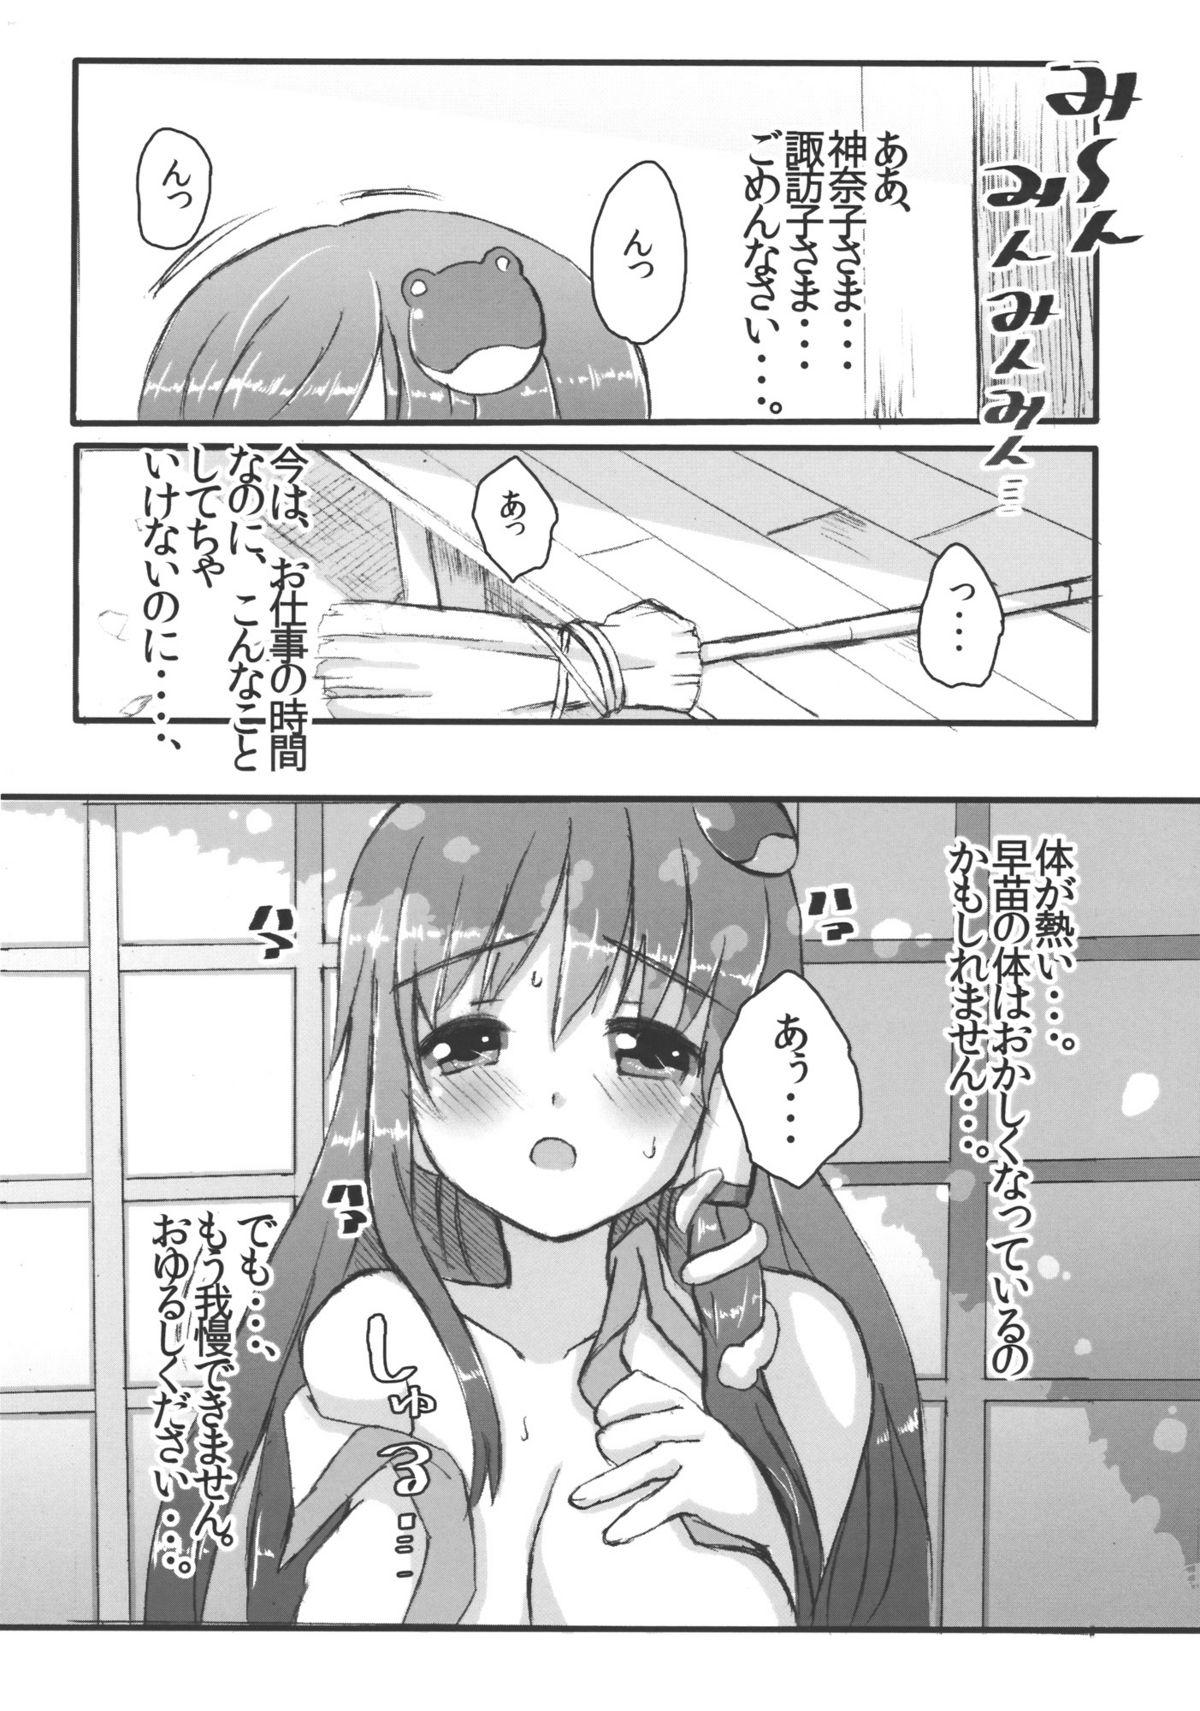 Livecams Sanae-san no Himegoto - Touhou project Cunt - Page 2